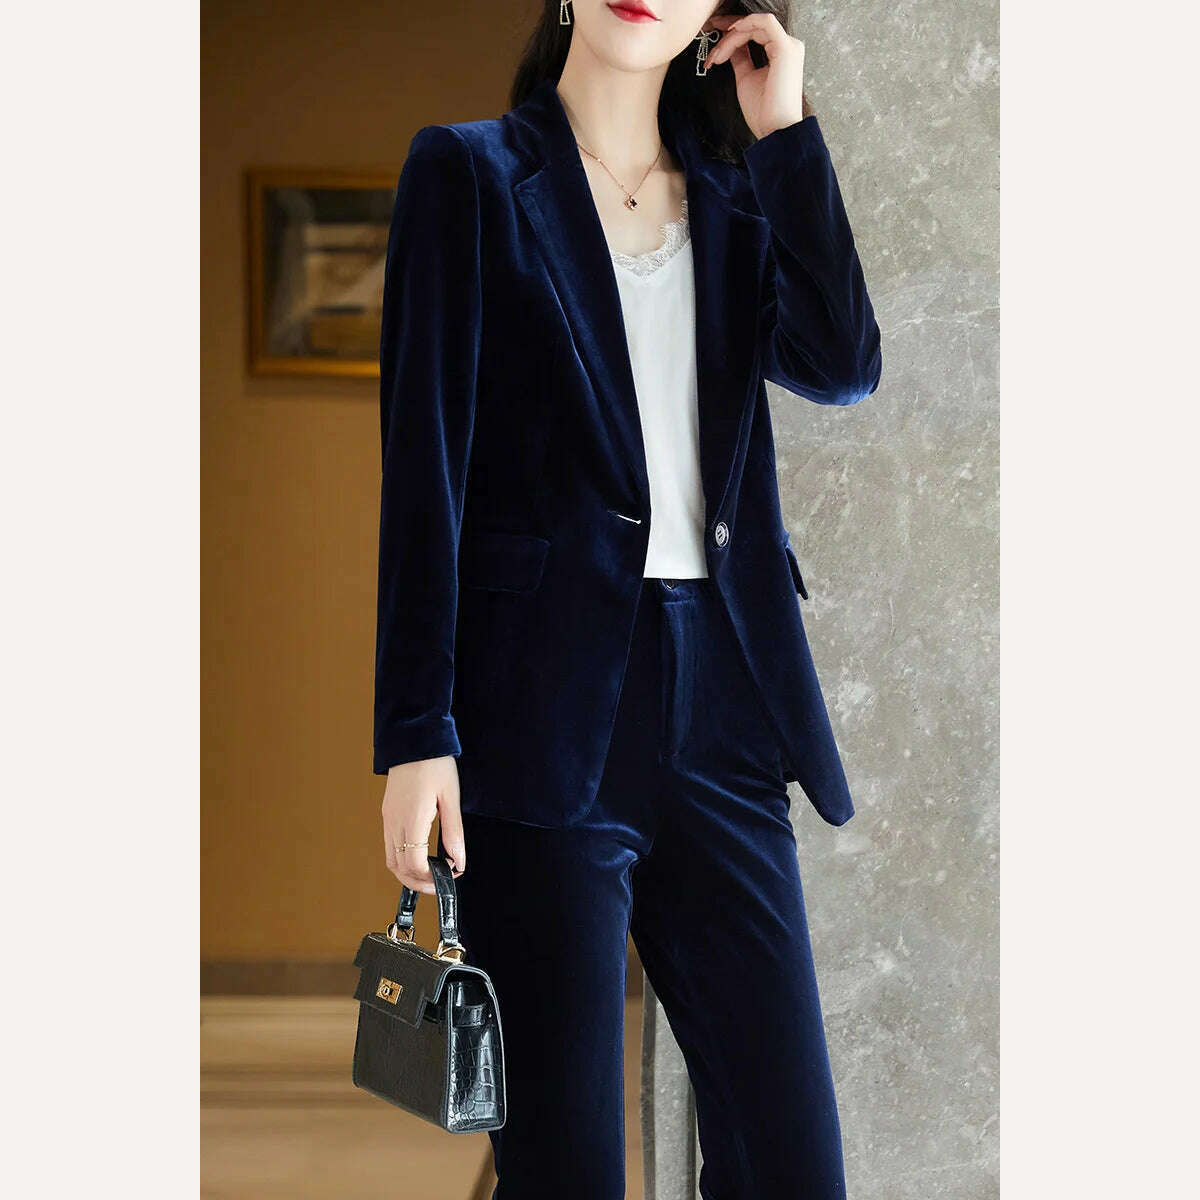 KIMLUD, High Quality Fabric Velvet Formal Women Business Suits OL Styles Professional Pantsuits Office Work Wear Autumn Winter Blazers, KIMLUD Womens Clothes